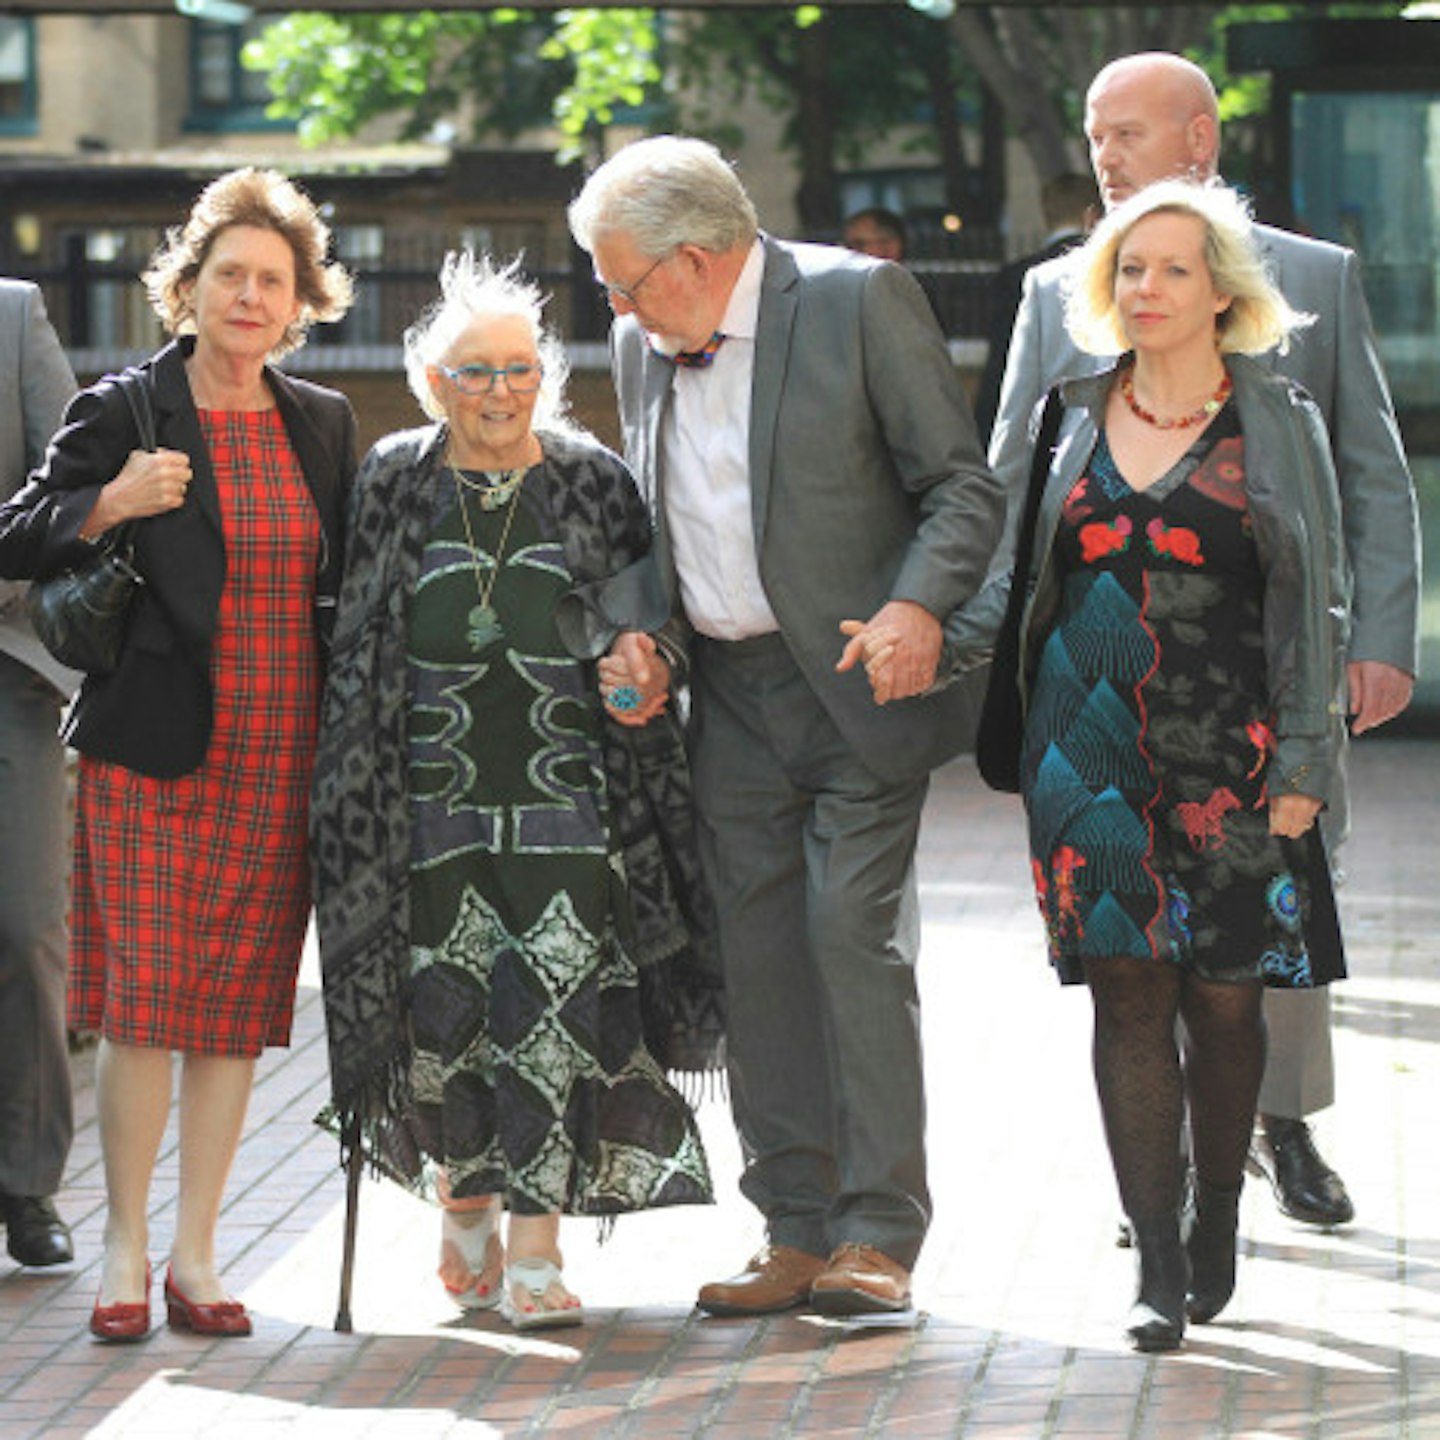 Rolf Harris supported by his wife and daughter as he attends trial